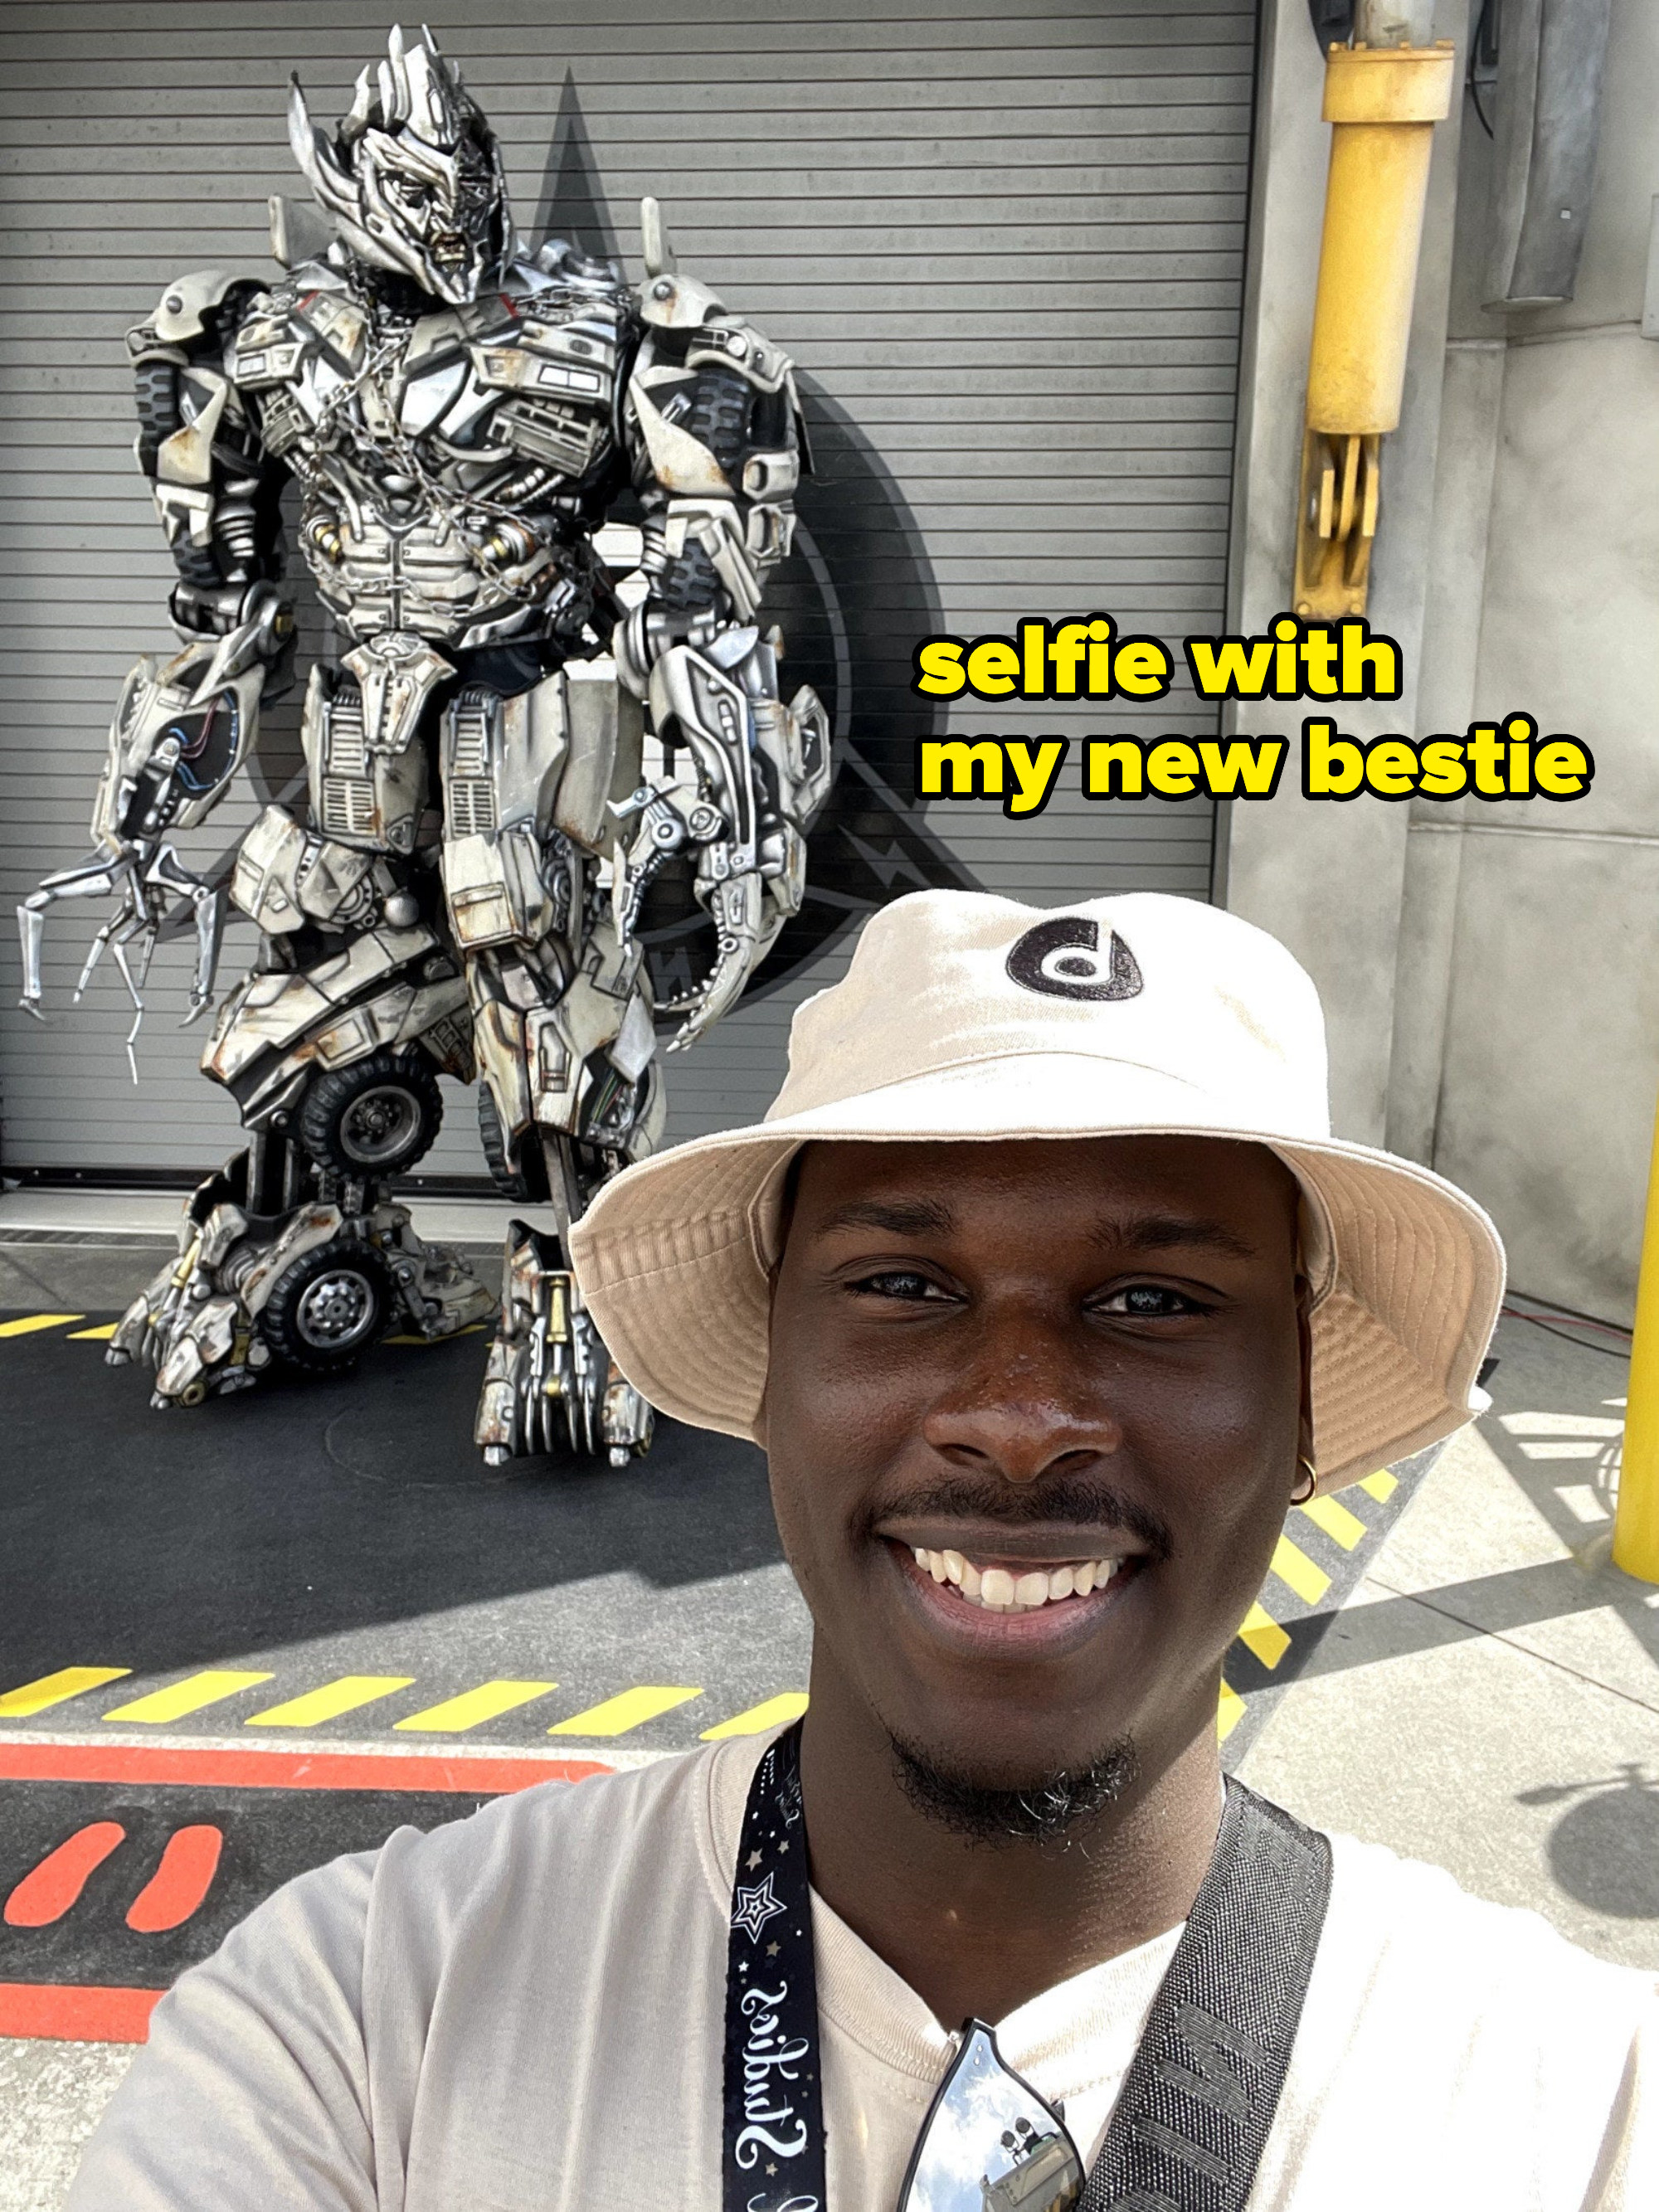 A photo of myself smiling in front of Megatron